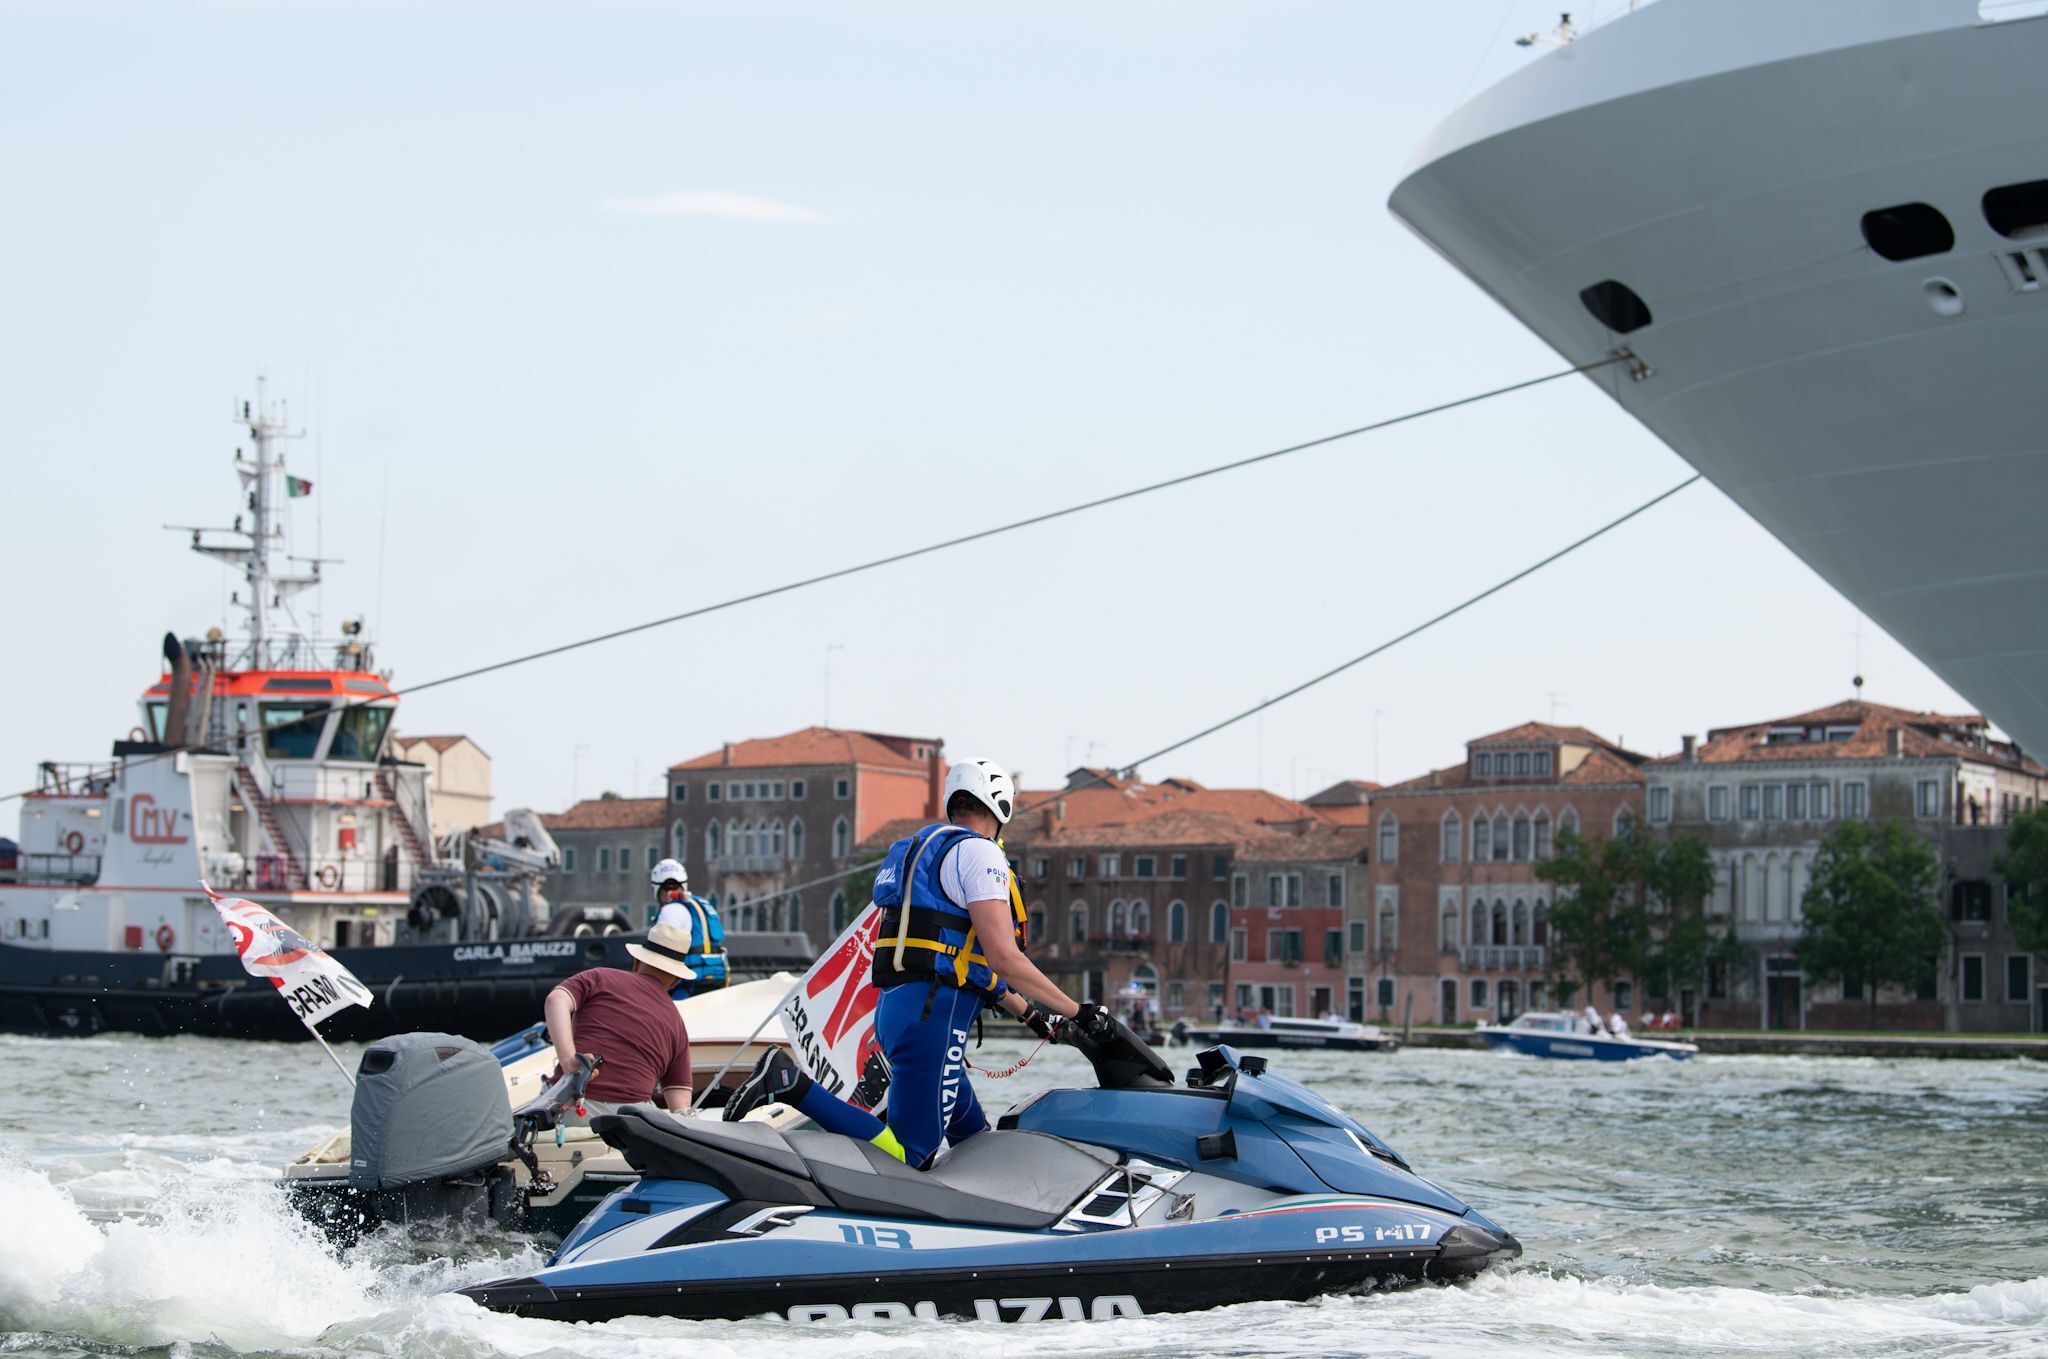 Protest Against Giant Cruise Ships, Venice, Italy - 05 Jun 2021